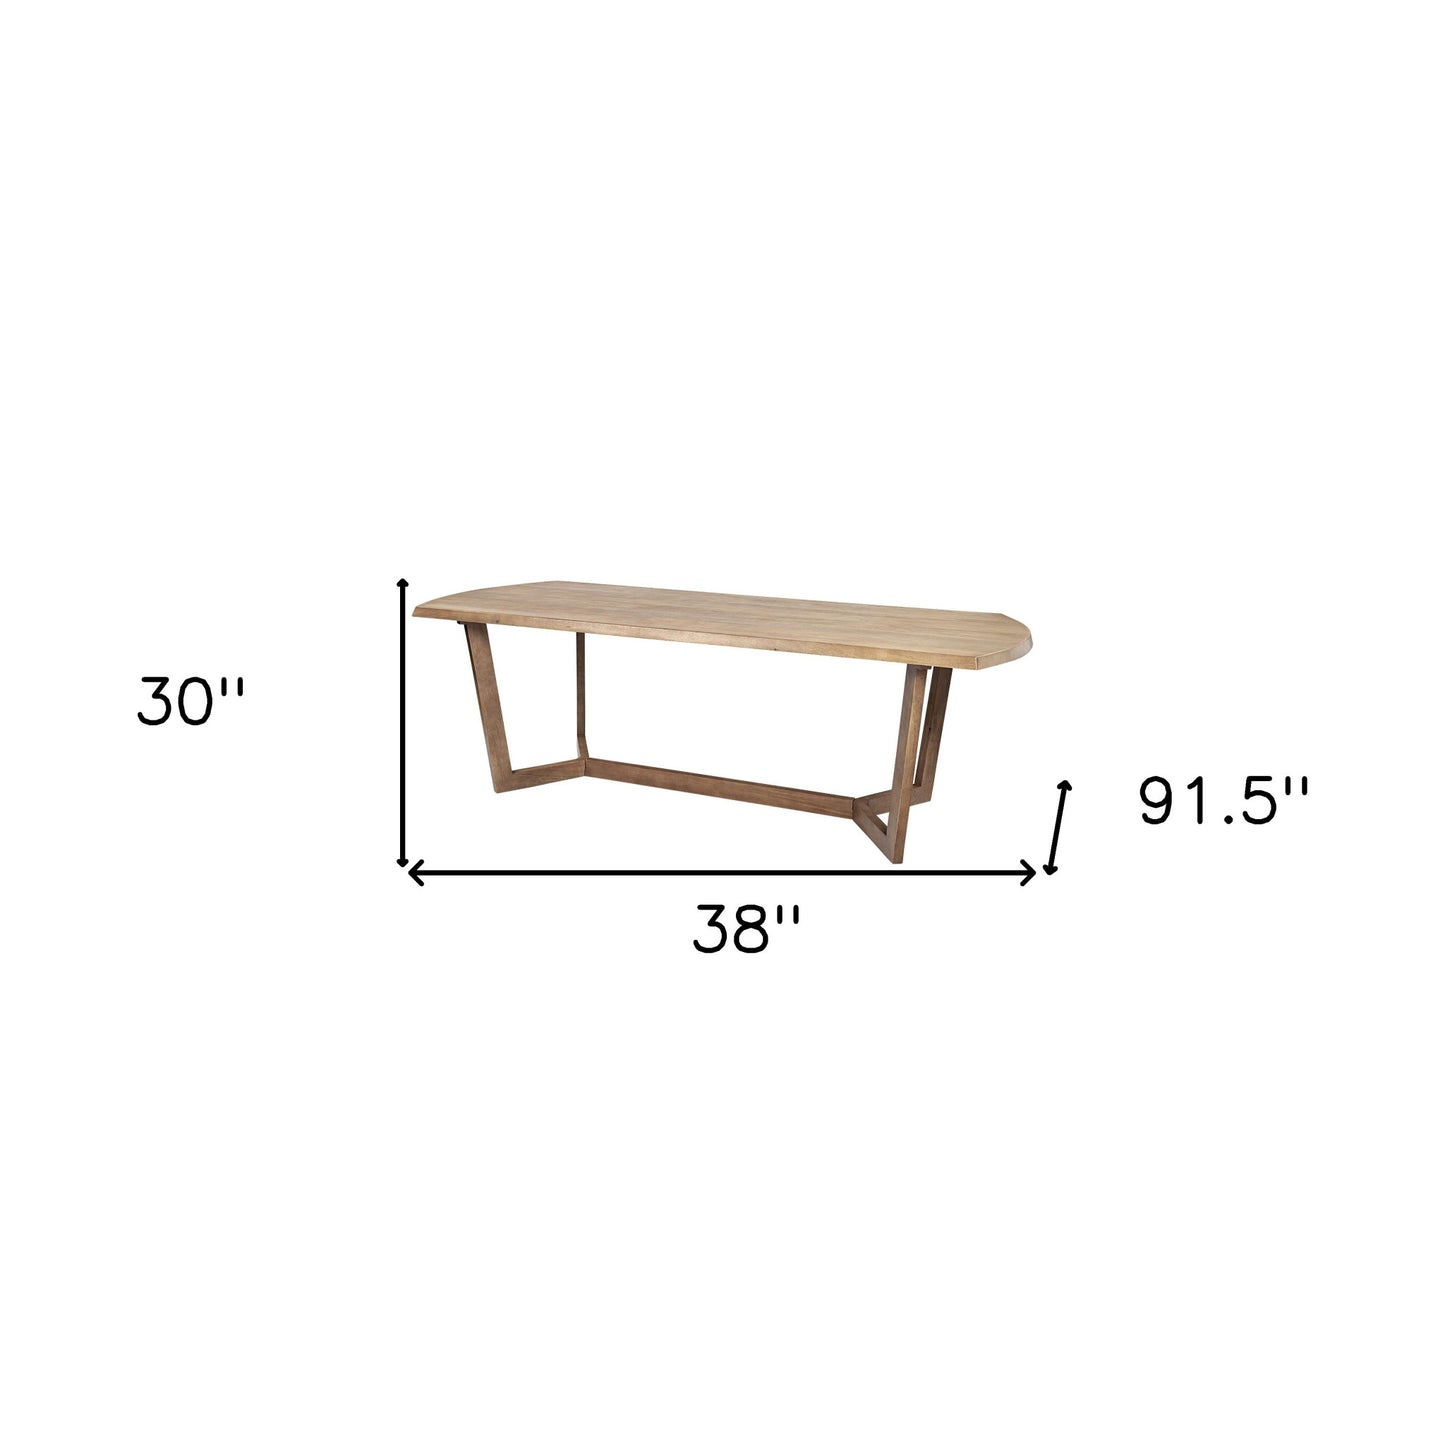 91.5X38 Rectangular Brown Solid Wood Top And Base Dining Table